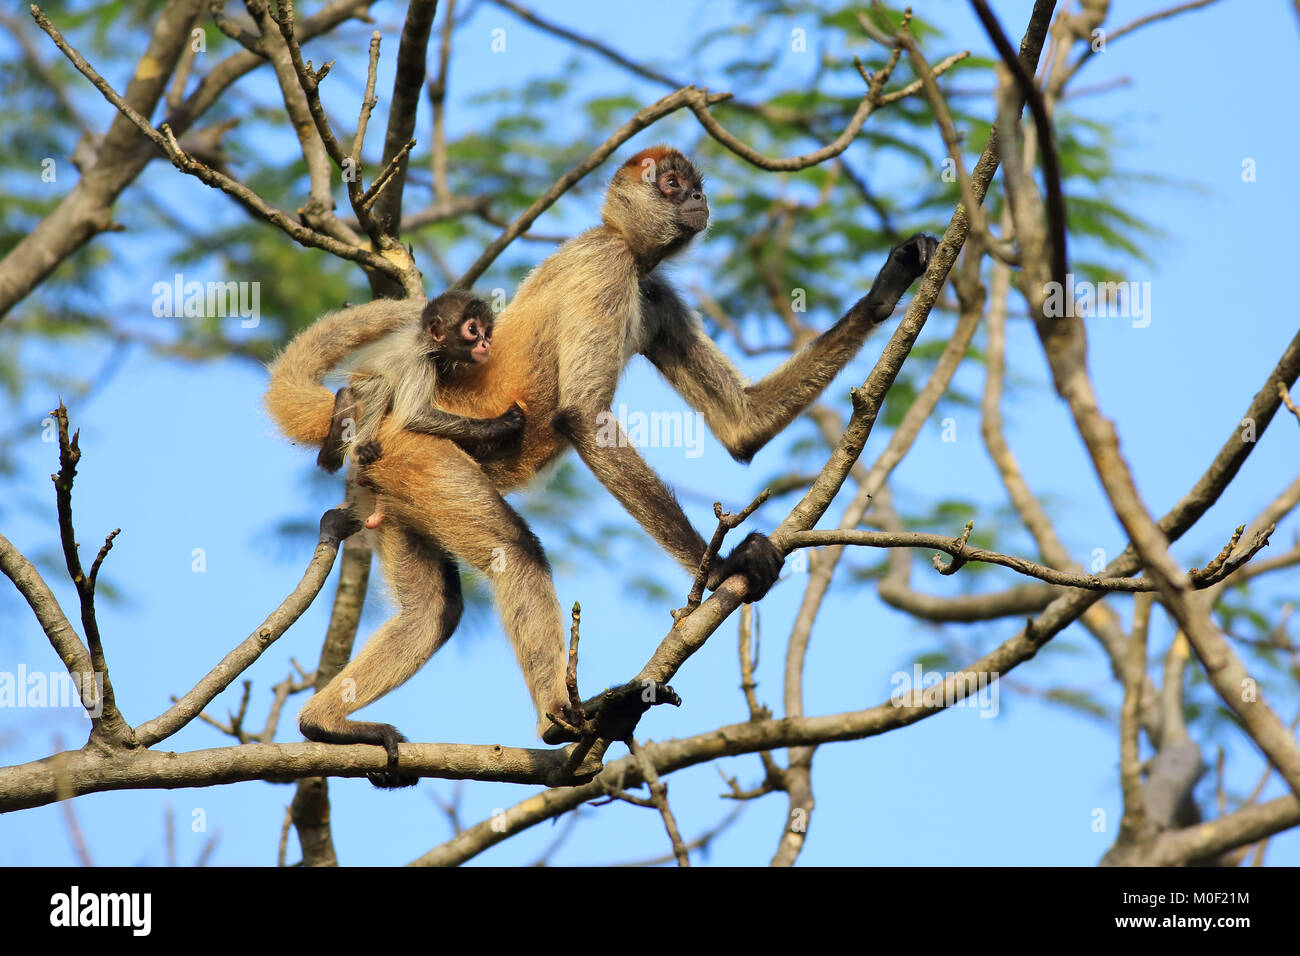 Central American Spider Monkey female with baby (Ateles geoffroyi). Santa Rosa National Park, Guanacaste, Costa Rica. May 2017. Stock Photo